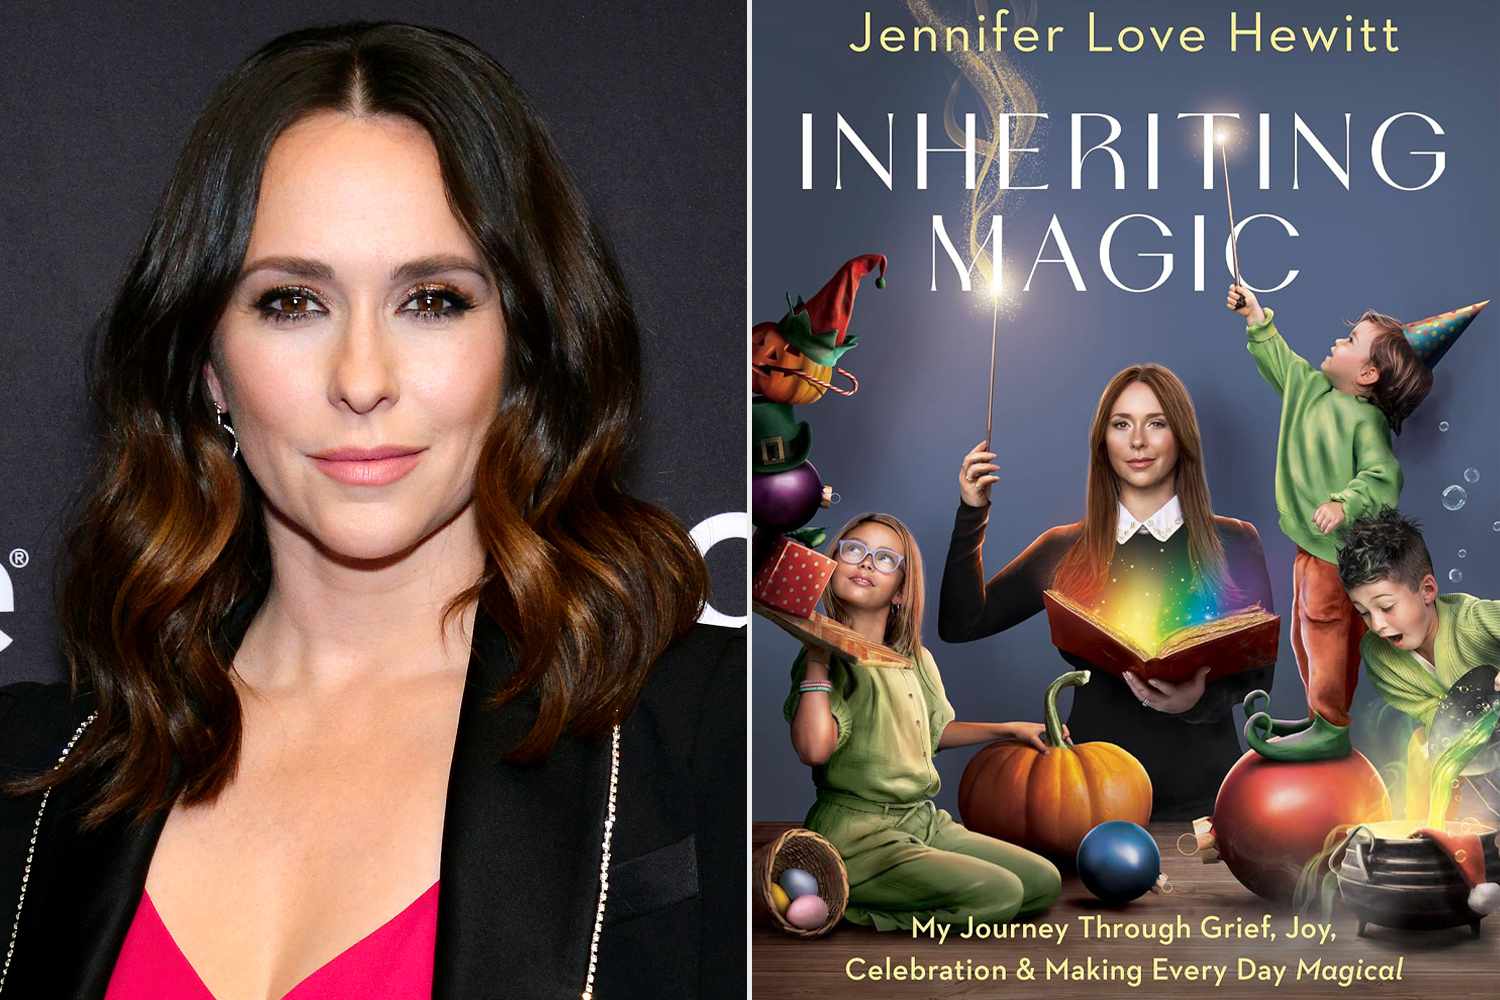 Jennifer Love Hewitt Shares First Pictures of Her Kids’ Faces on Memoir Cover [Video]